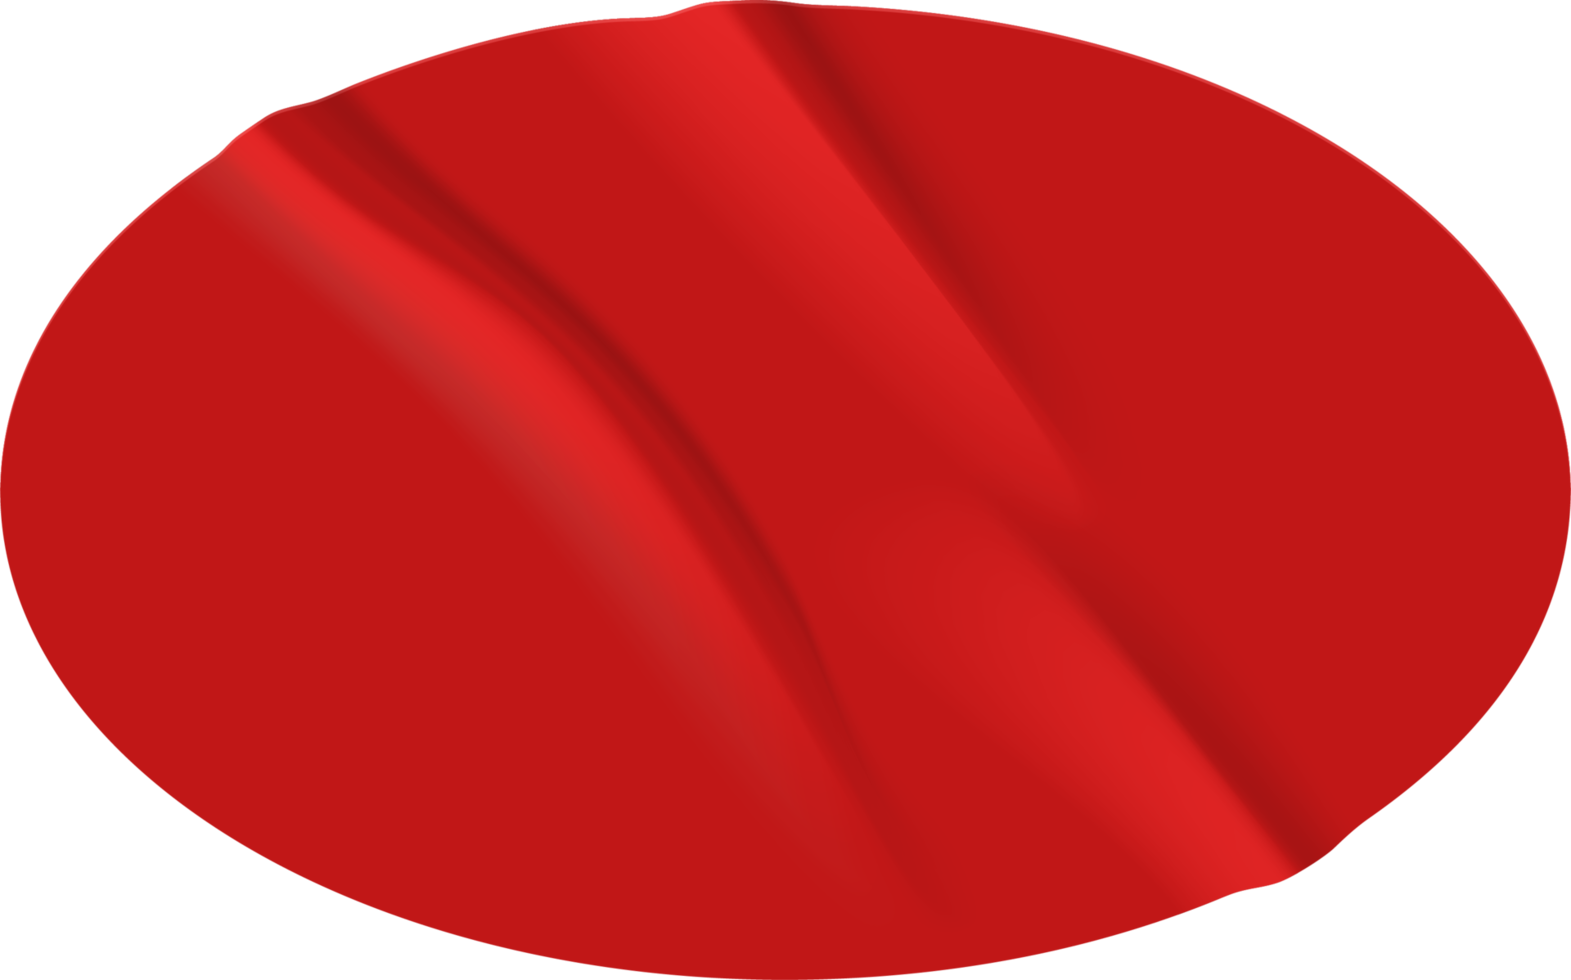 Crumpled fabric ovalfon red. png